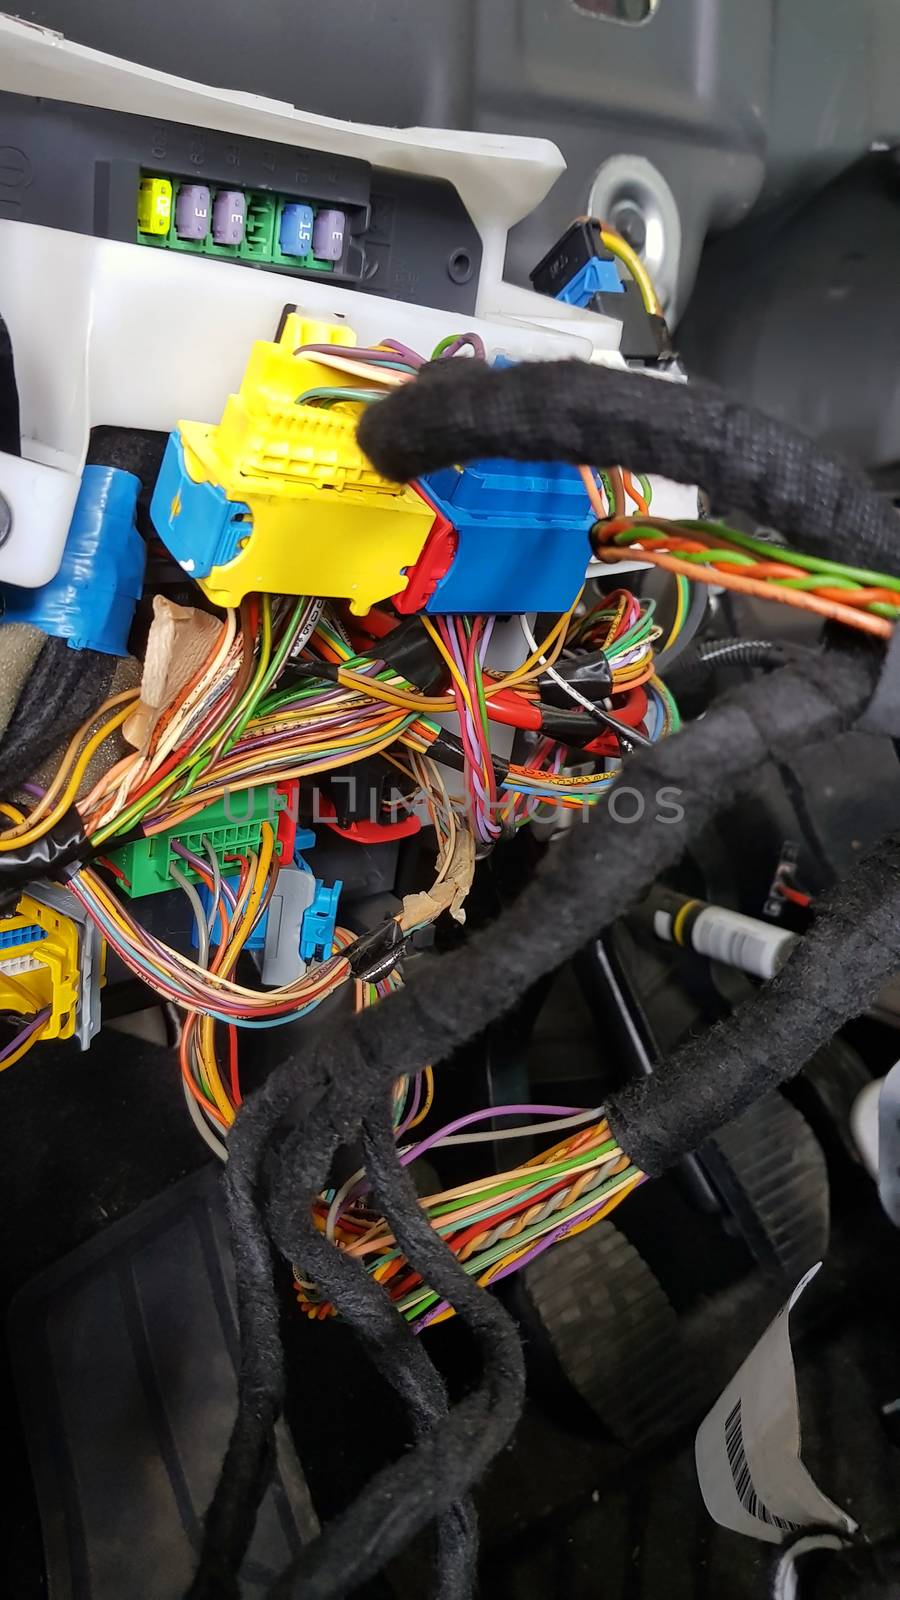 Car electrical system, engine control unit (many wires and some fuses).